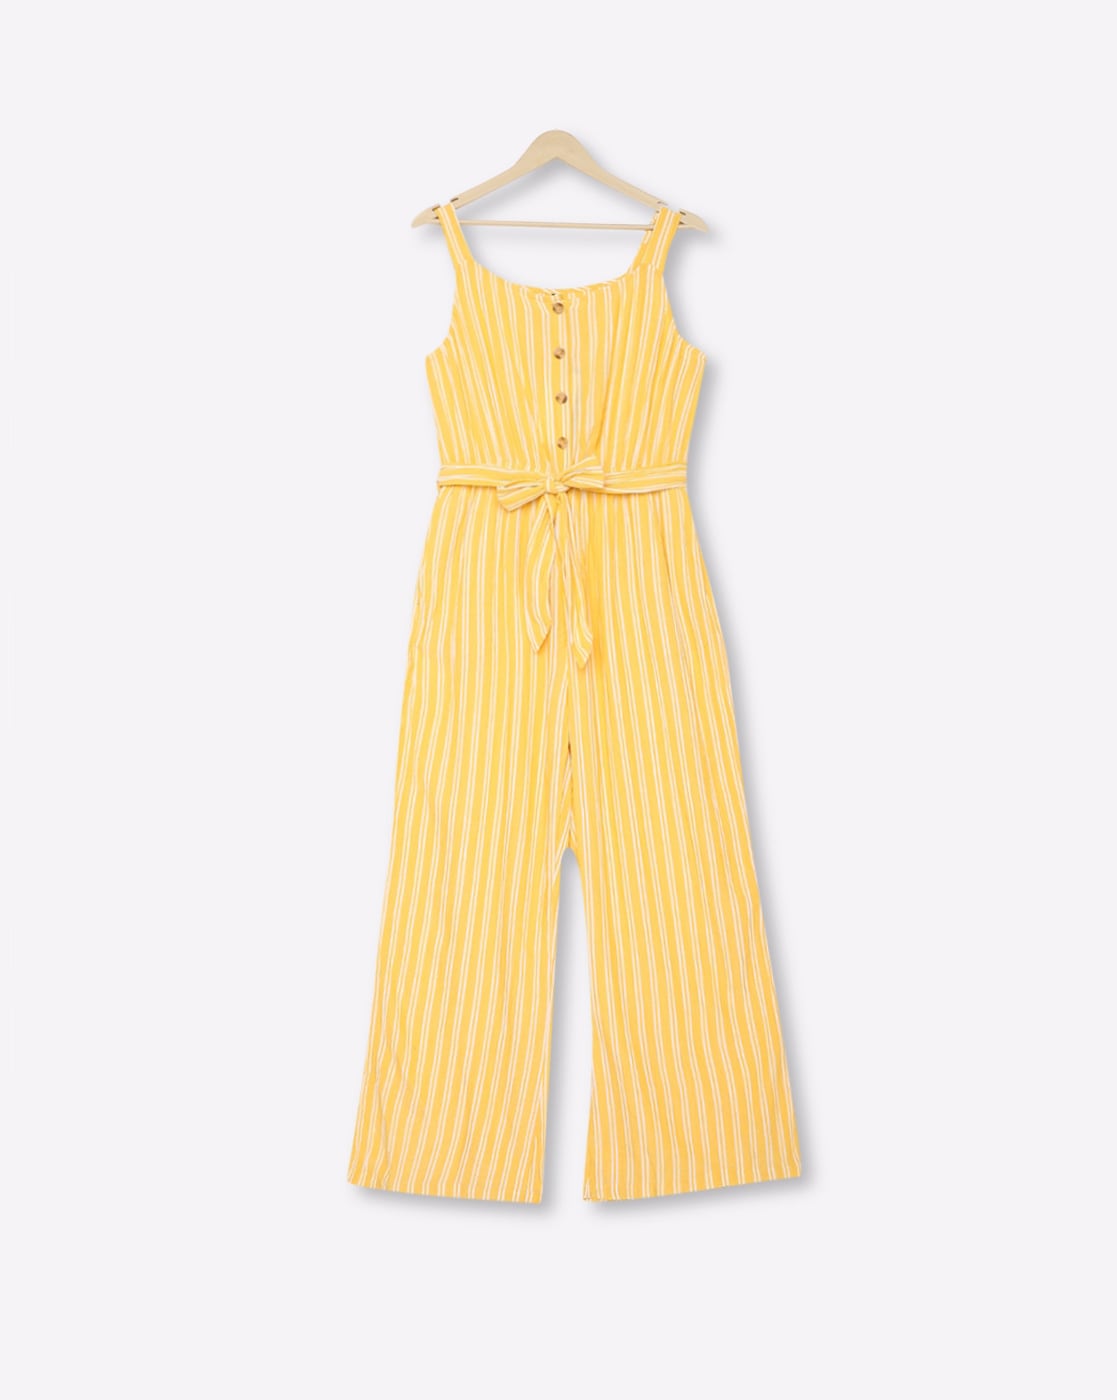 Details 68+ yellow and white striped jumpsuit super hot - ceg.edu.vn